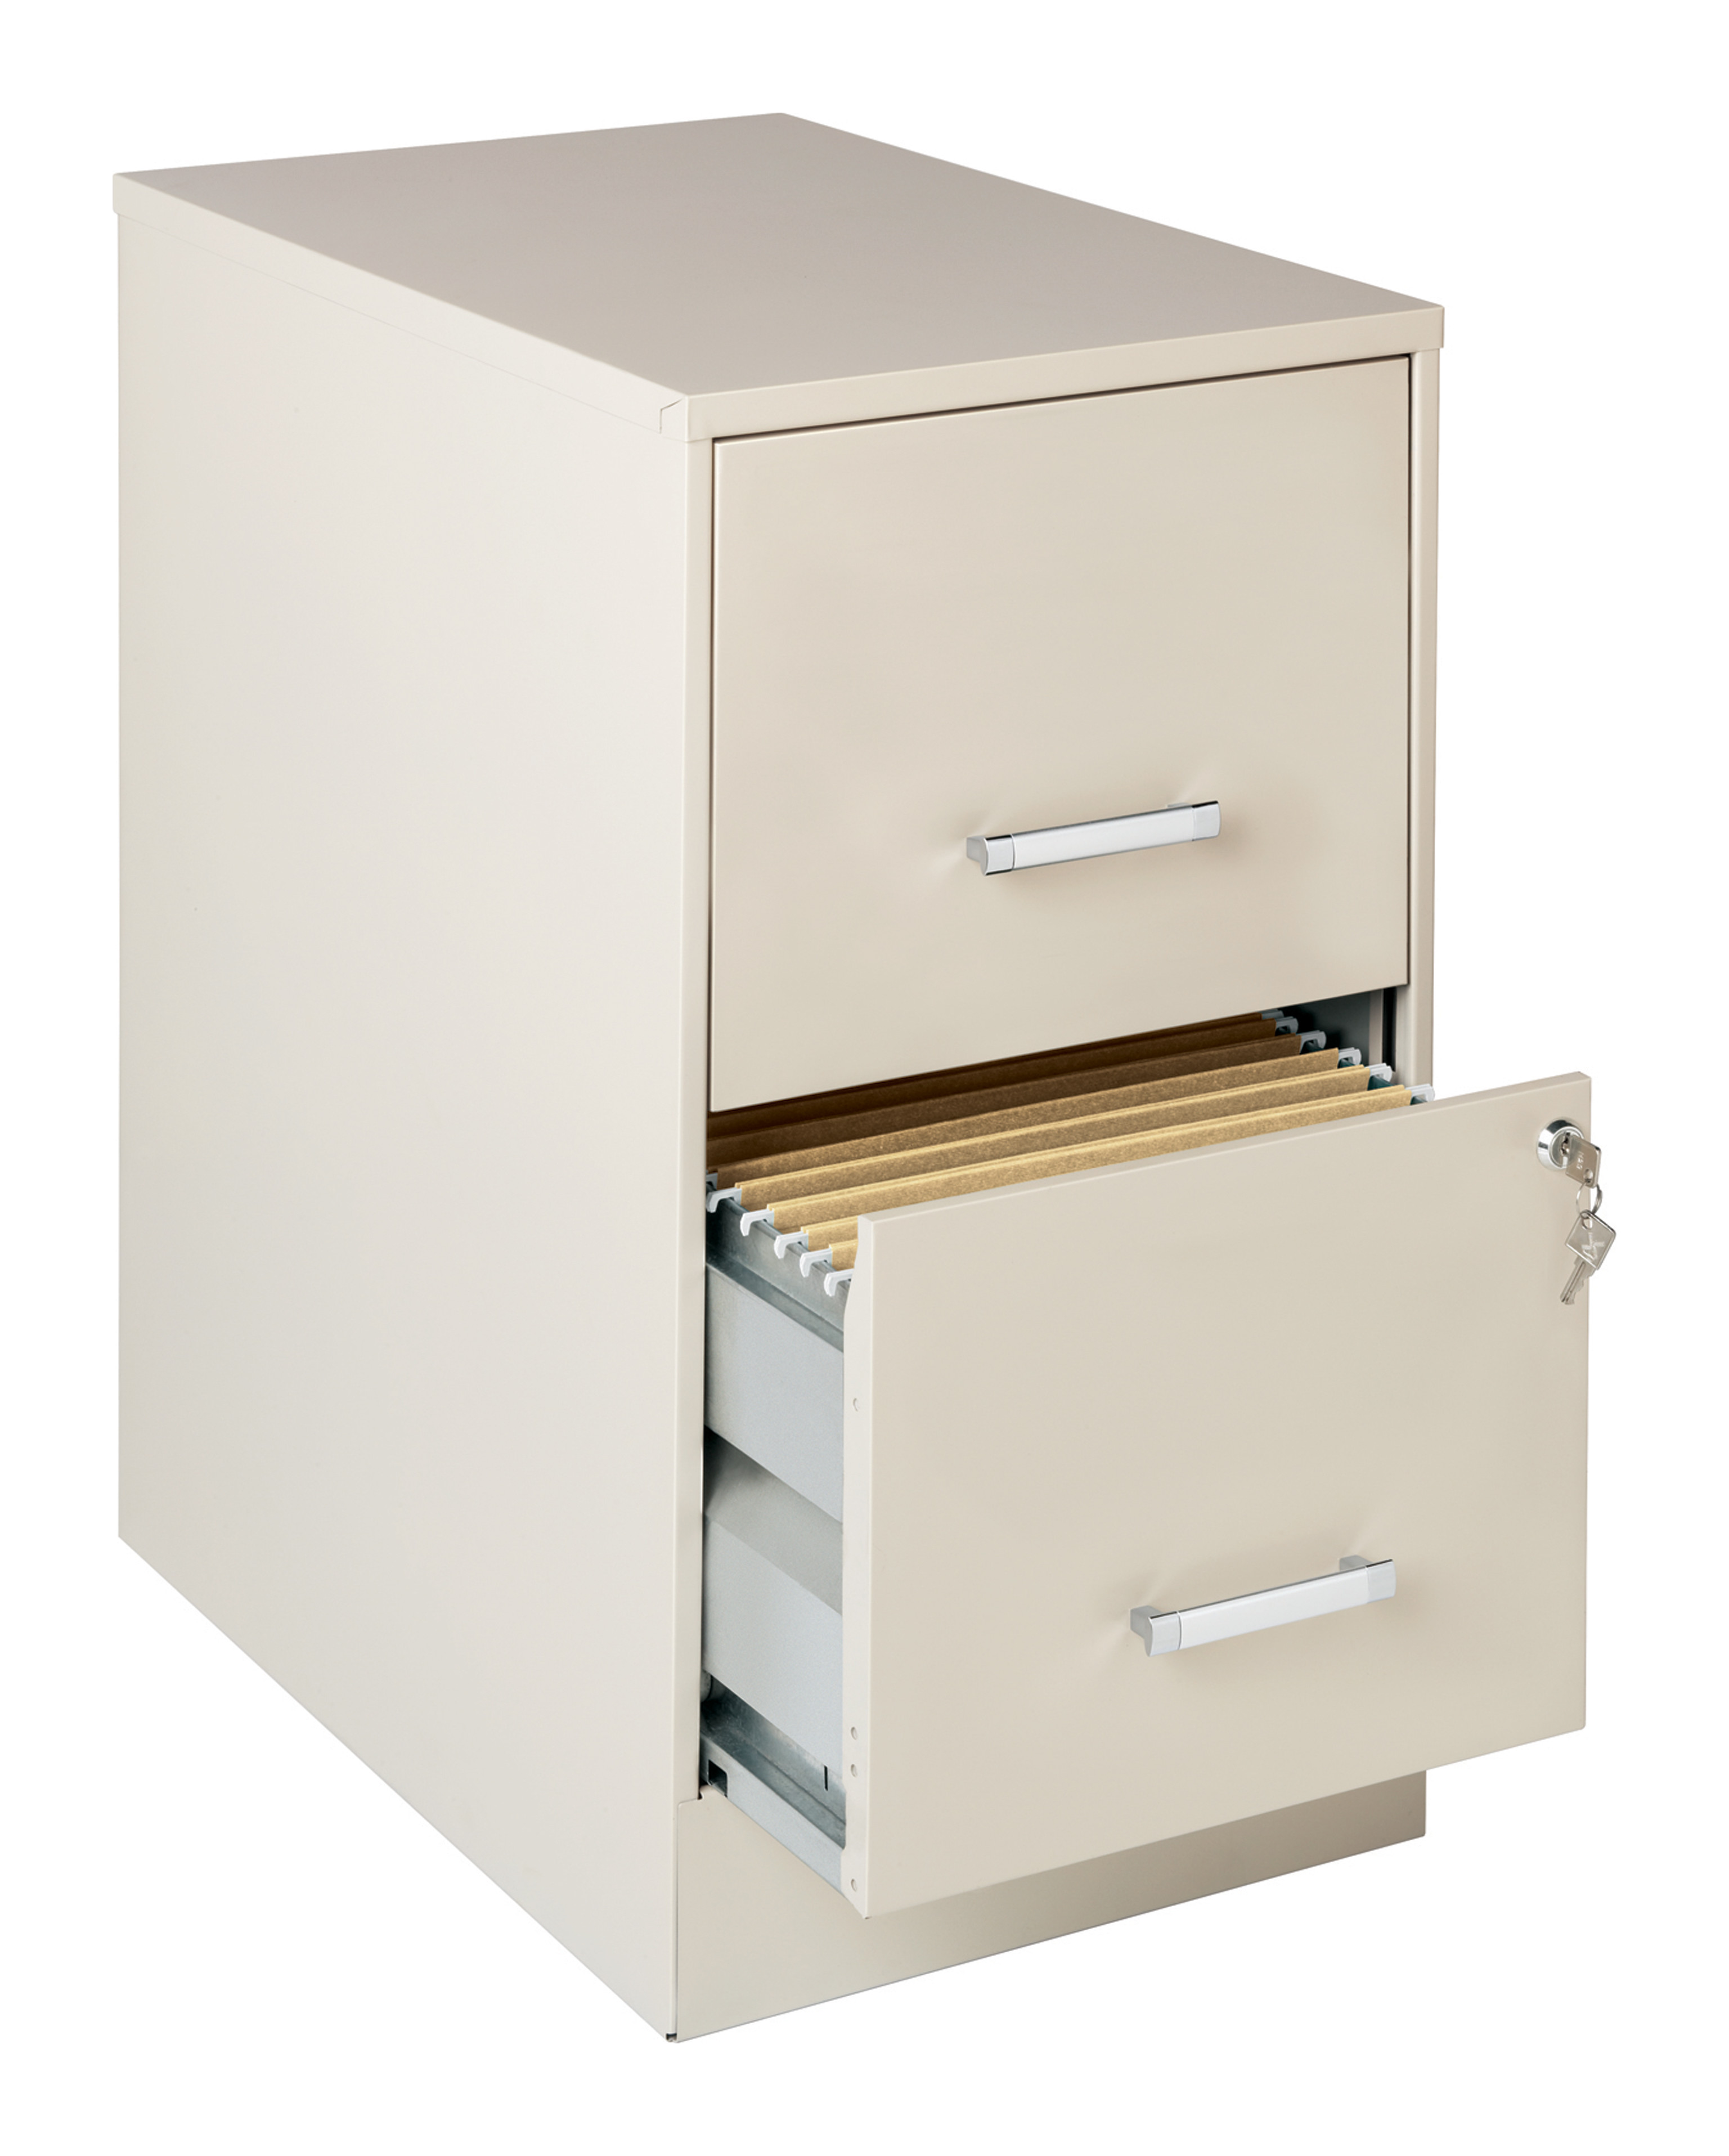 Space Solutions 22" Deep 2 Drawer Mobile Smart Letter Width Vertical File Cabinet, Stone - image 1 of 2